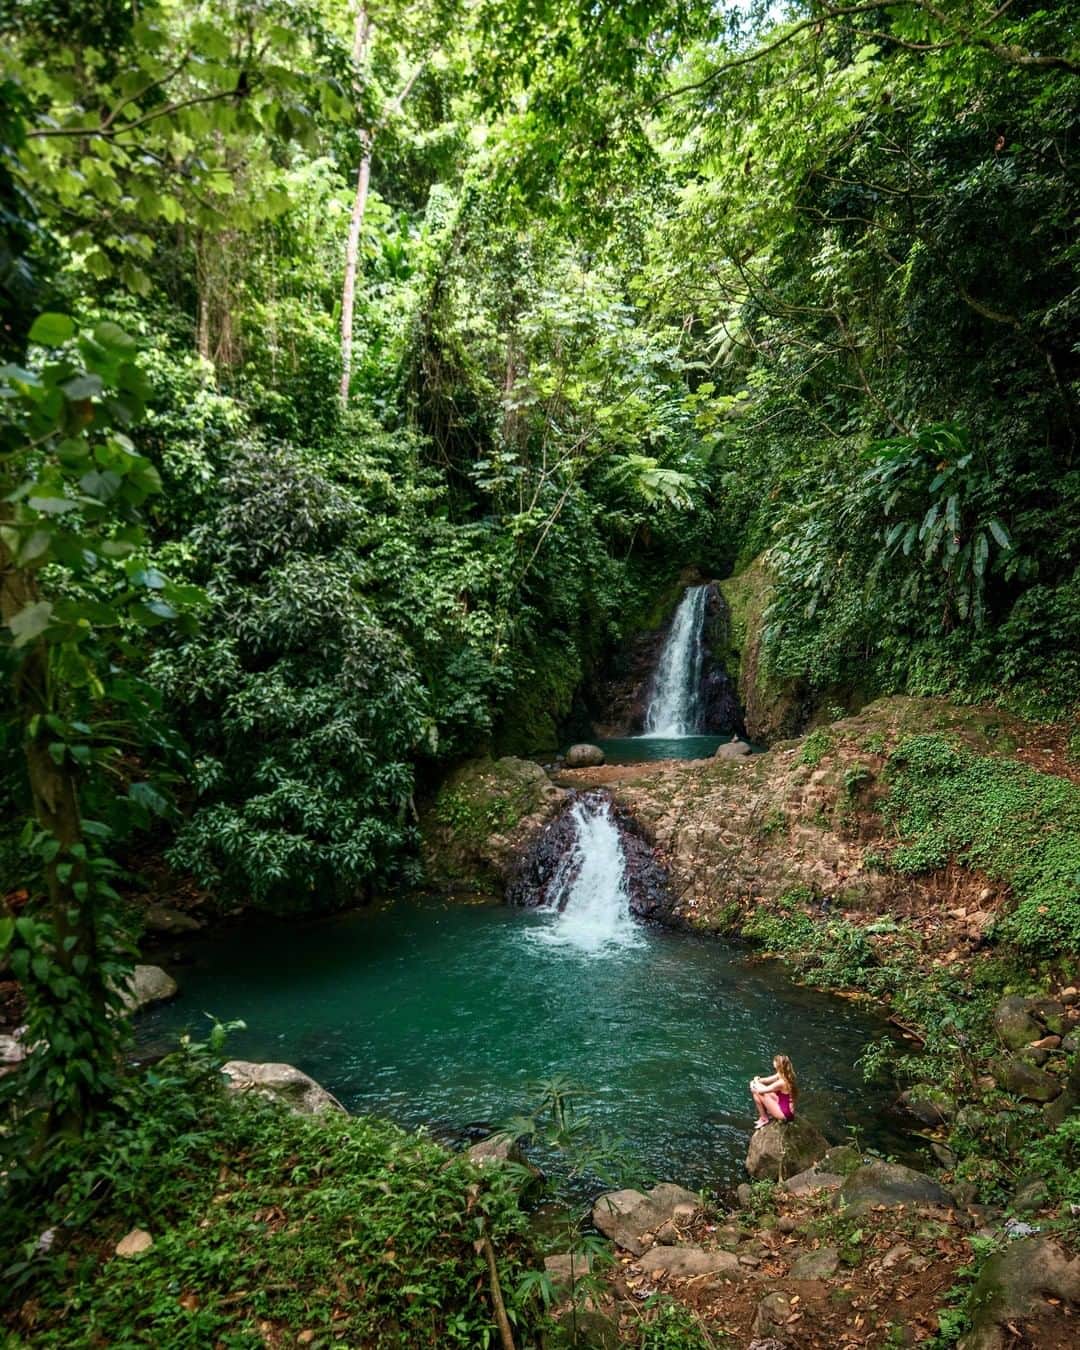 AIR CANADAのインスタグラム：「Known as the “Spice Isle”, Grenada brings the heat. But it can be just as sweet too! Especially when you discover hidden gems like this double waterfall, scattered all across the island. 📸: @christinexploring @_doctor_hoff_ . . Surnommée l’île aux épices, la Grenade ne manque pas de piquant. Cela dit, elle recèle aussi de trésors cachés empreints de douceur, comme ces apaisantes cascades. 📸: @christinexploring @_doctor_hoff_」